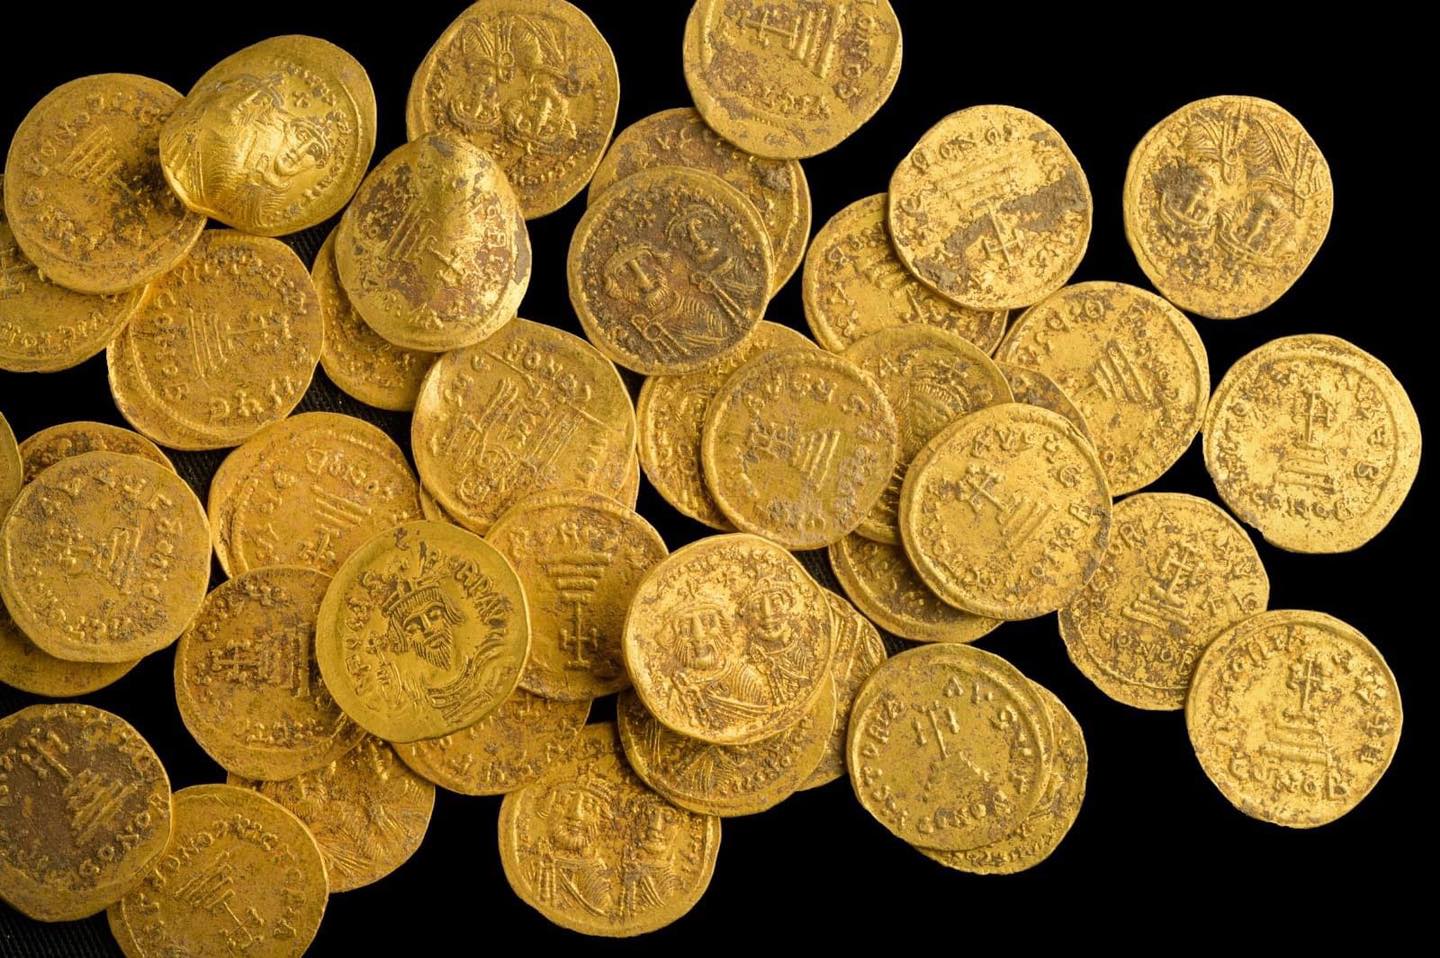 Ancient gold coins found hidden in a wall shed light on the Byzantine ...